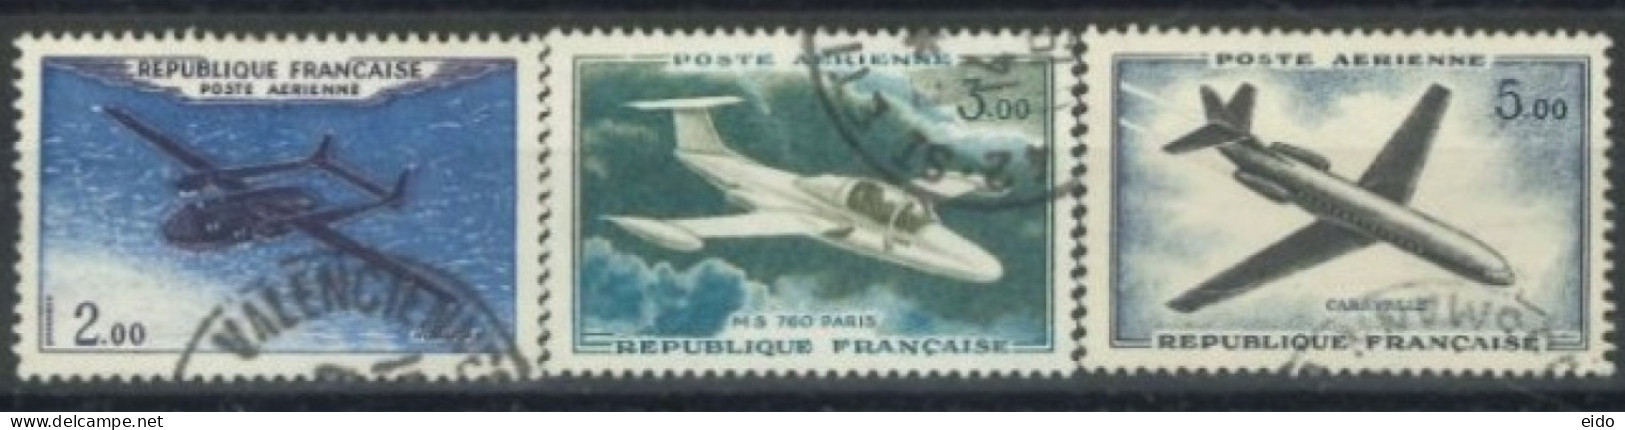 FRANCE - 1960/ 64, AIR PLANES STAMPS SET OF 3, USED - Used Stamps